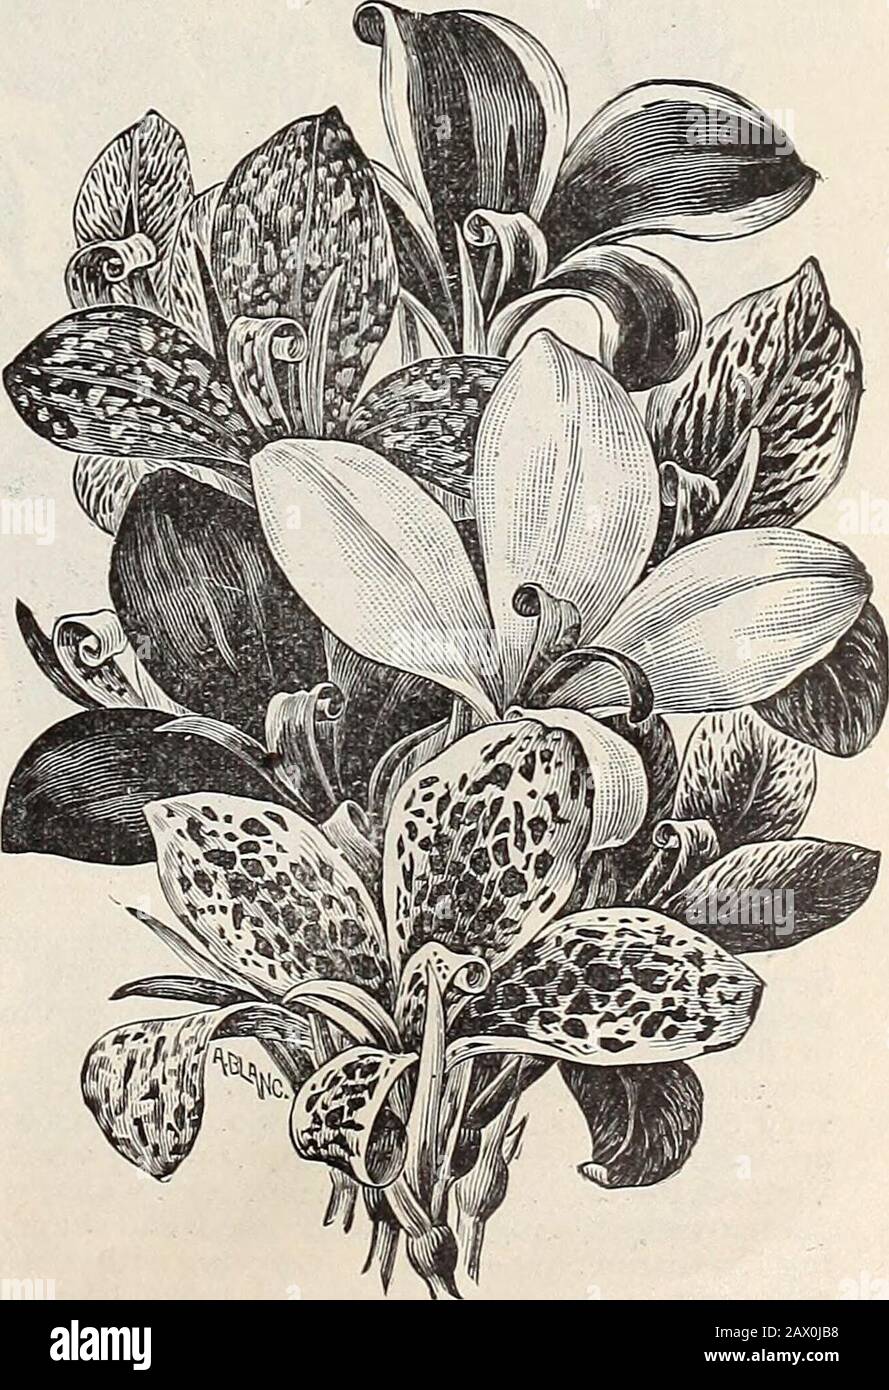 Cox seed and plant cocatalogue . terof vases, etc. 20 cents each; 3 for 50 cents. Childsii (The Tiger Canna)—The flowers are bornein large, compact panicles, are of large size and perfectshape, with broad petals and of a bright, gloss, yellowcolor, thickly spotted with crimson. 20 cents each; 3for 50 cents. Duchess de Hontenard—Very large flowers of abright yellow, spotted with red; foliage green; 4)4feet. Emile Leclaire—Flowers large, bright, golden yel-low, mottled and spotted crimson and scarlet. Usefulas a cut flower, as its peculiar color gives it the ap-pearance of an Orchid. Pea-green f Stock Photo